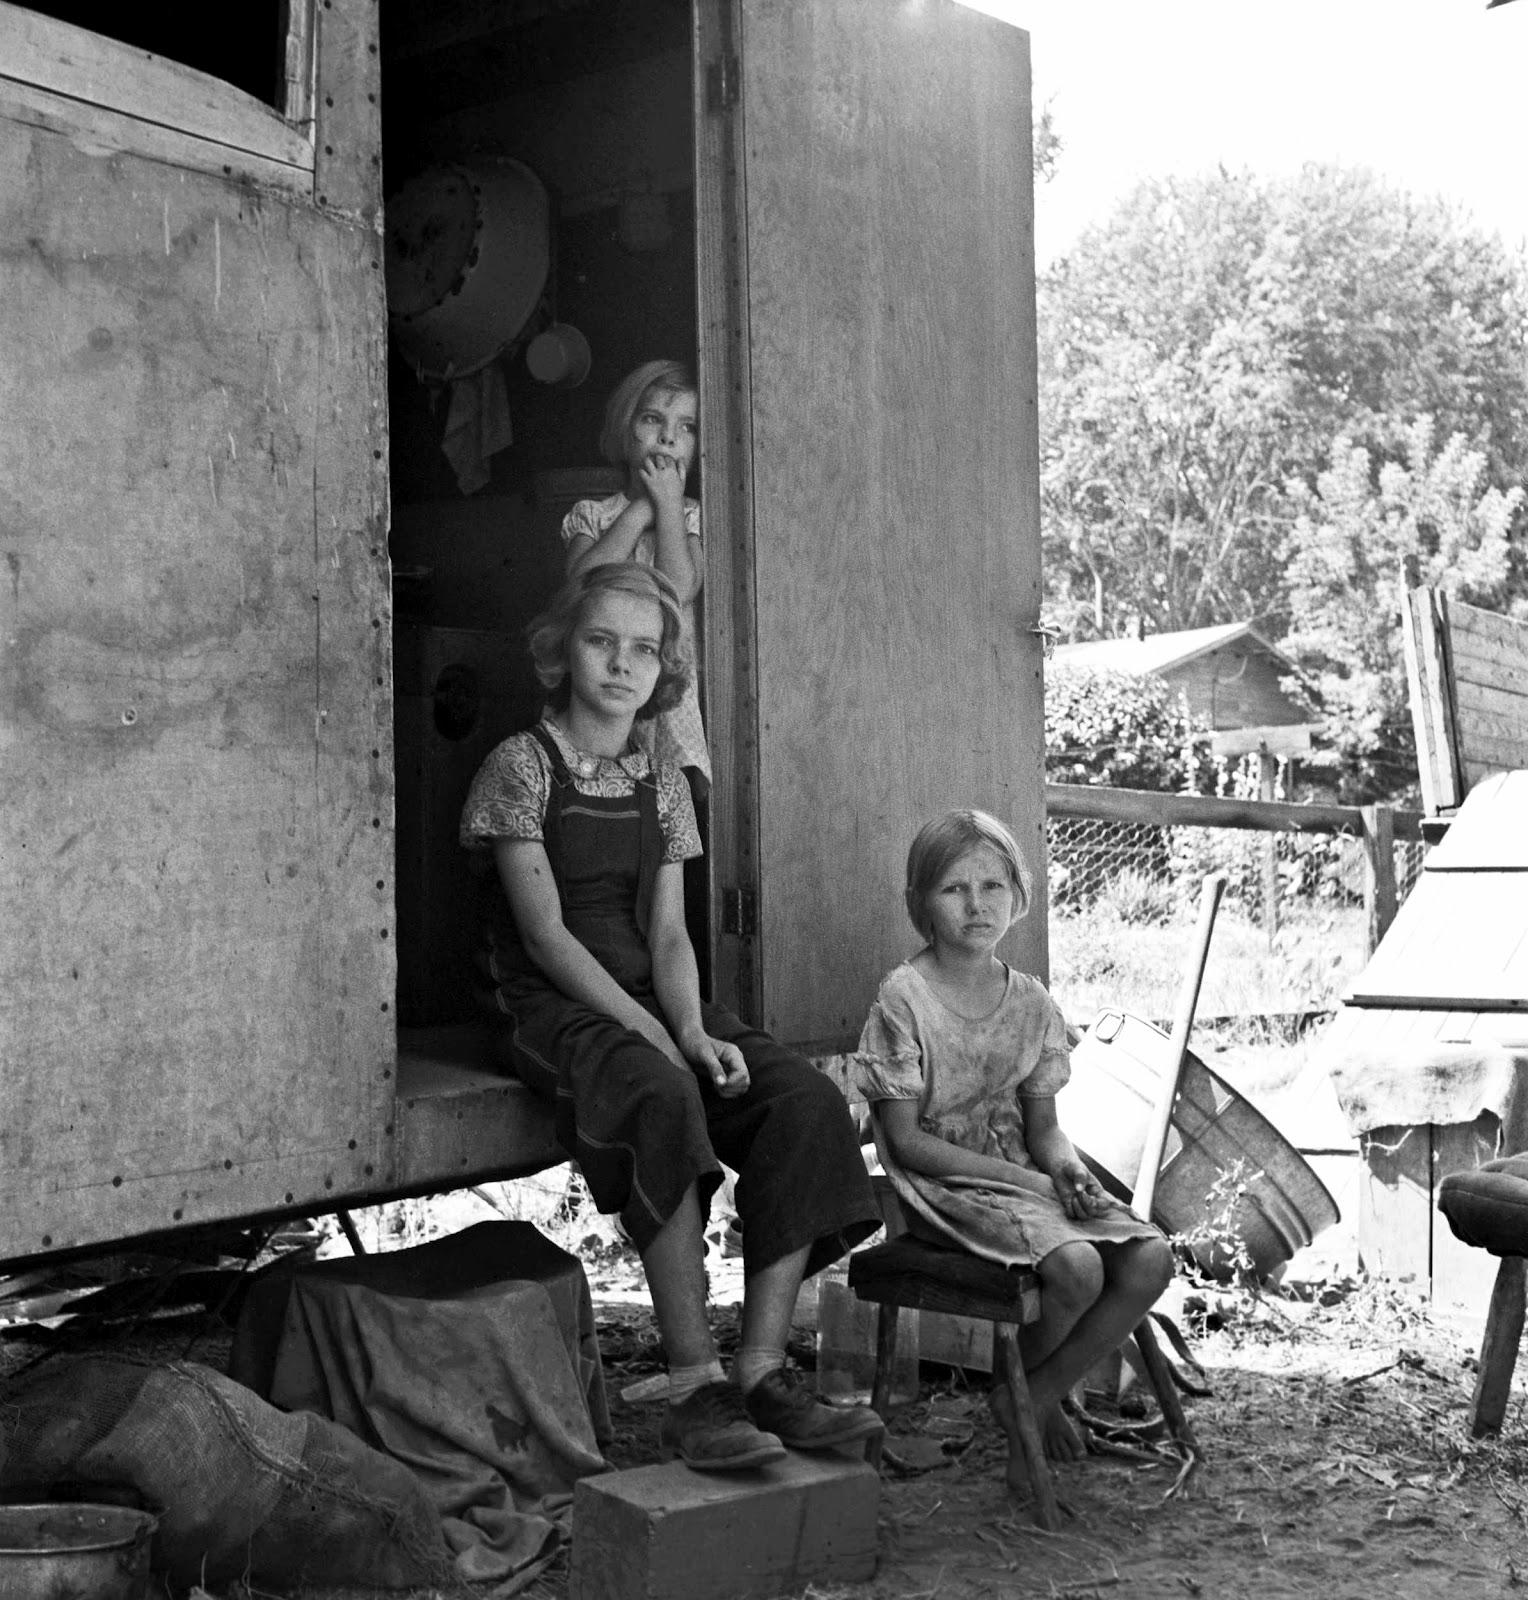 The oldest girl seated in the doorway of the house trailer cares for the family. Yakima Valley, Washington 1939. photo by Dorothea Lange